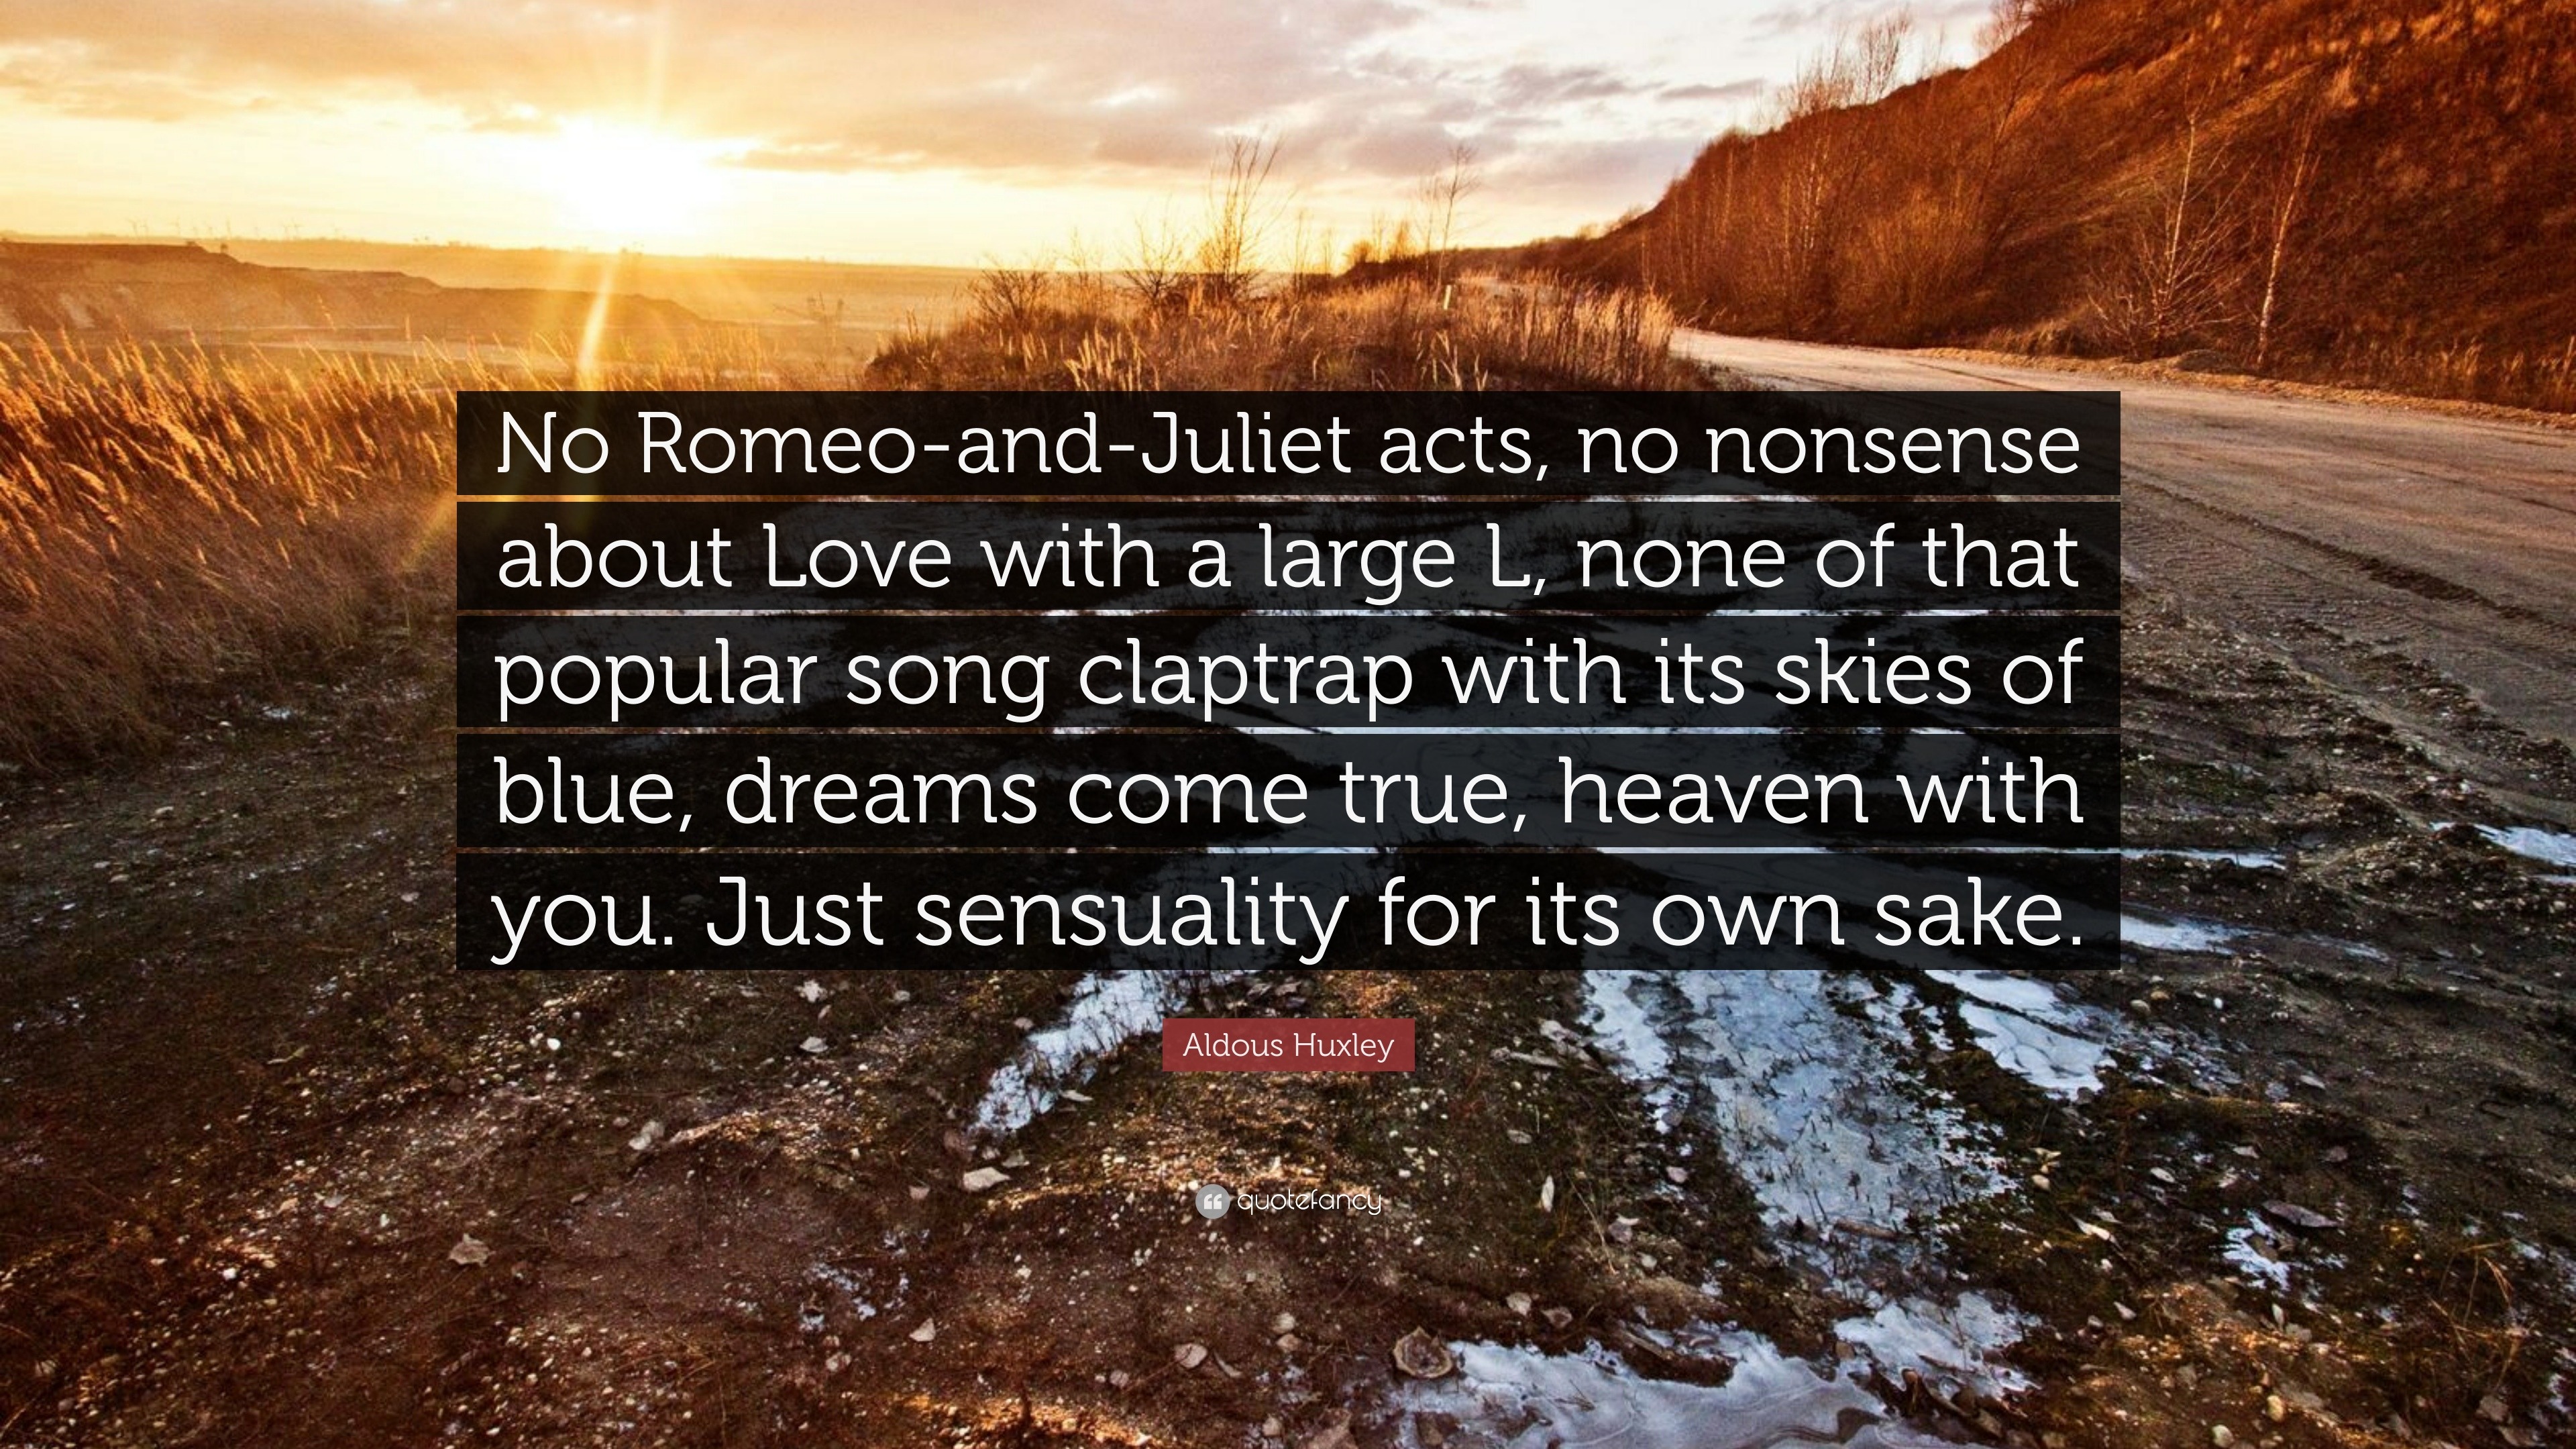 Aldous Huxley Quote “No Romeo and Juliet acts no nonsense about